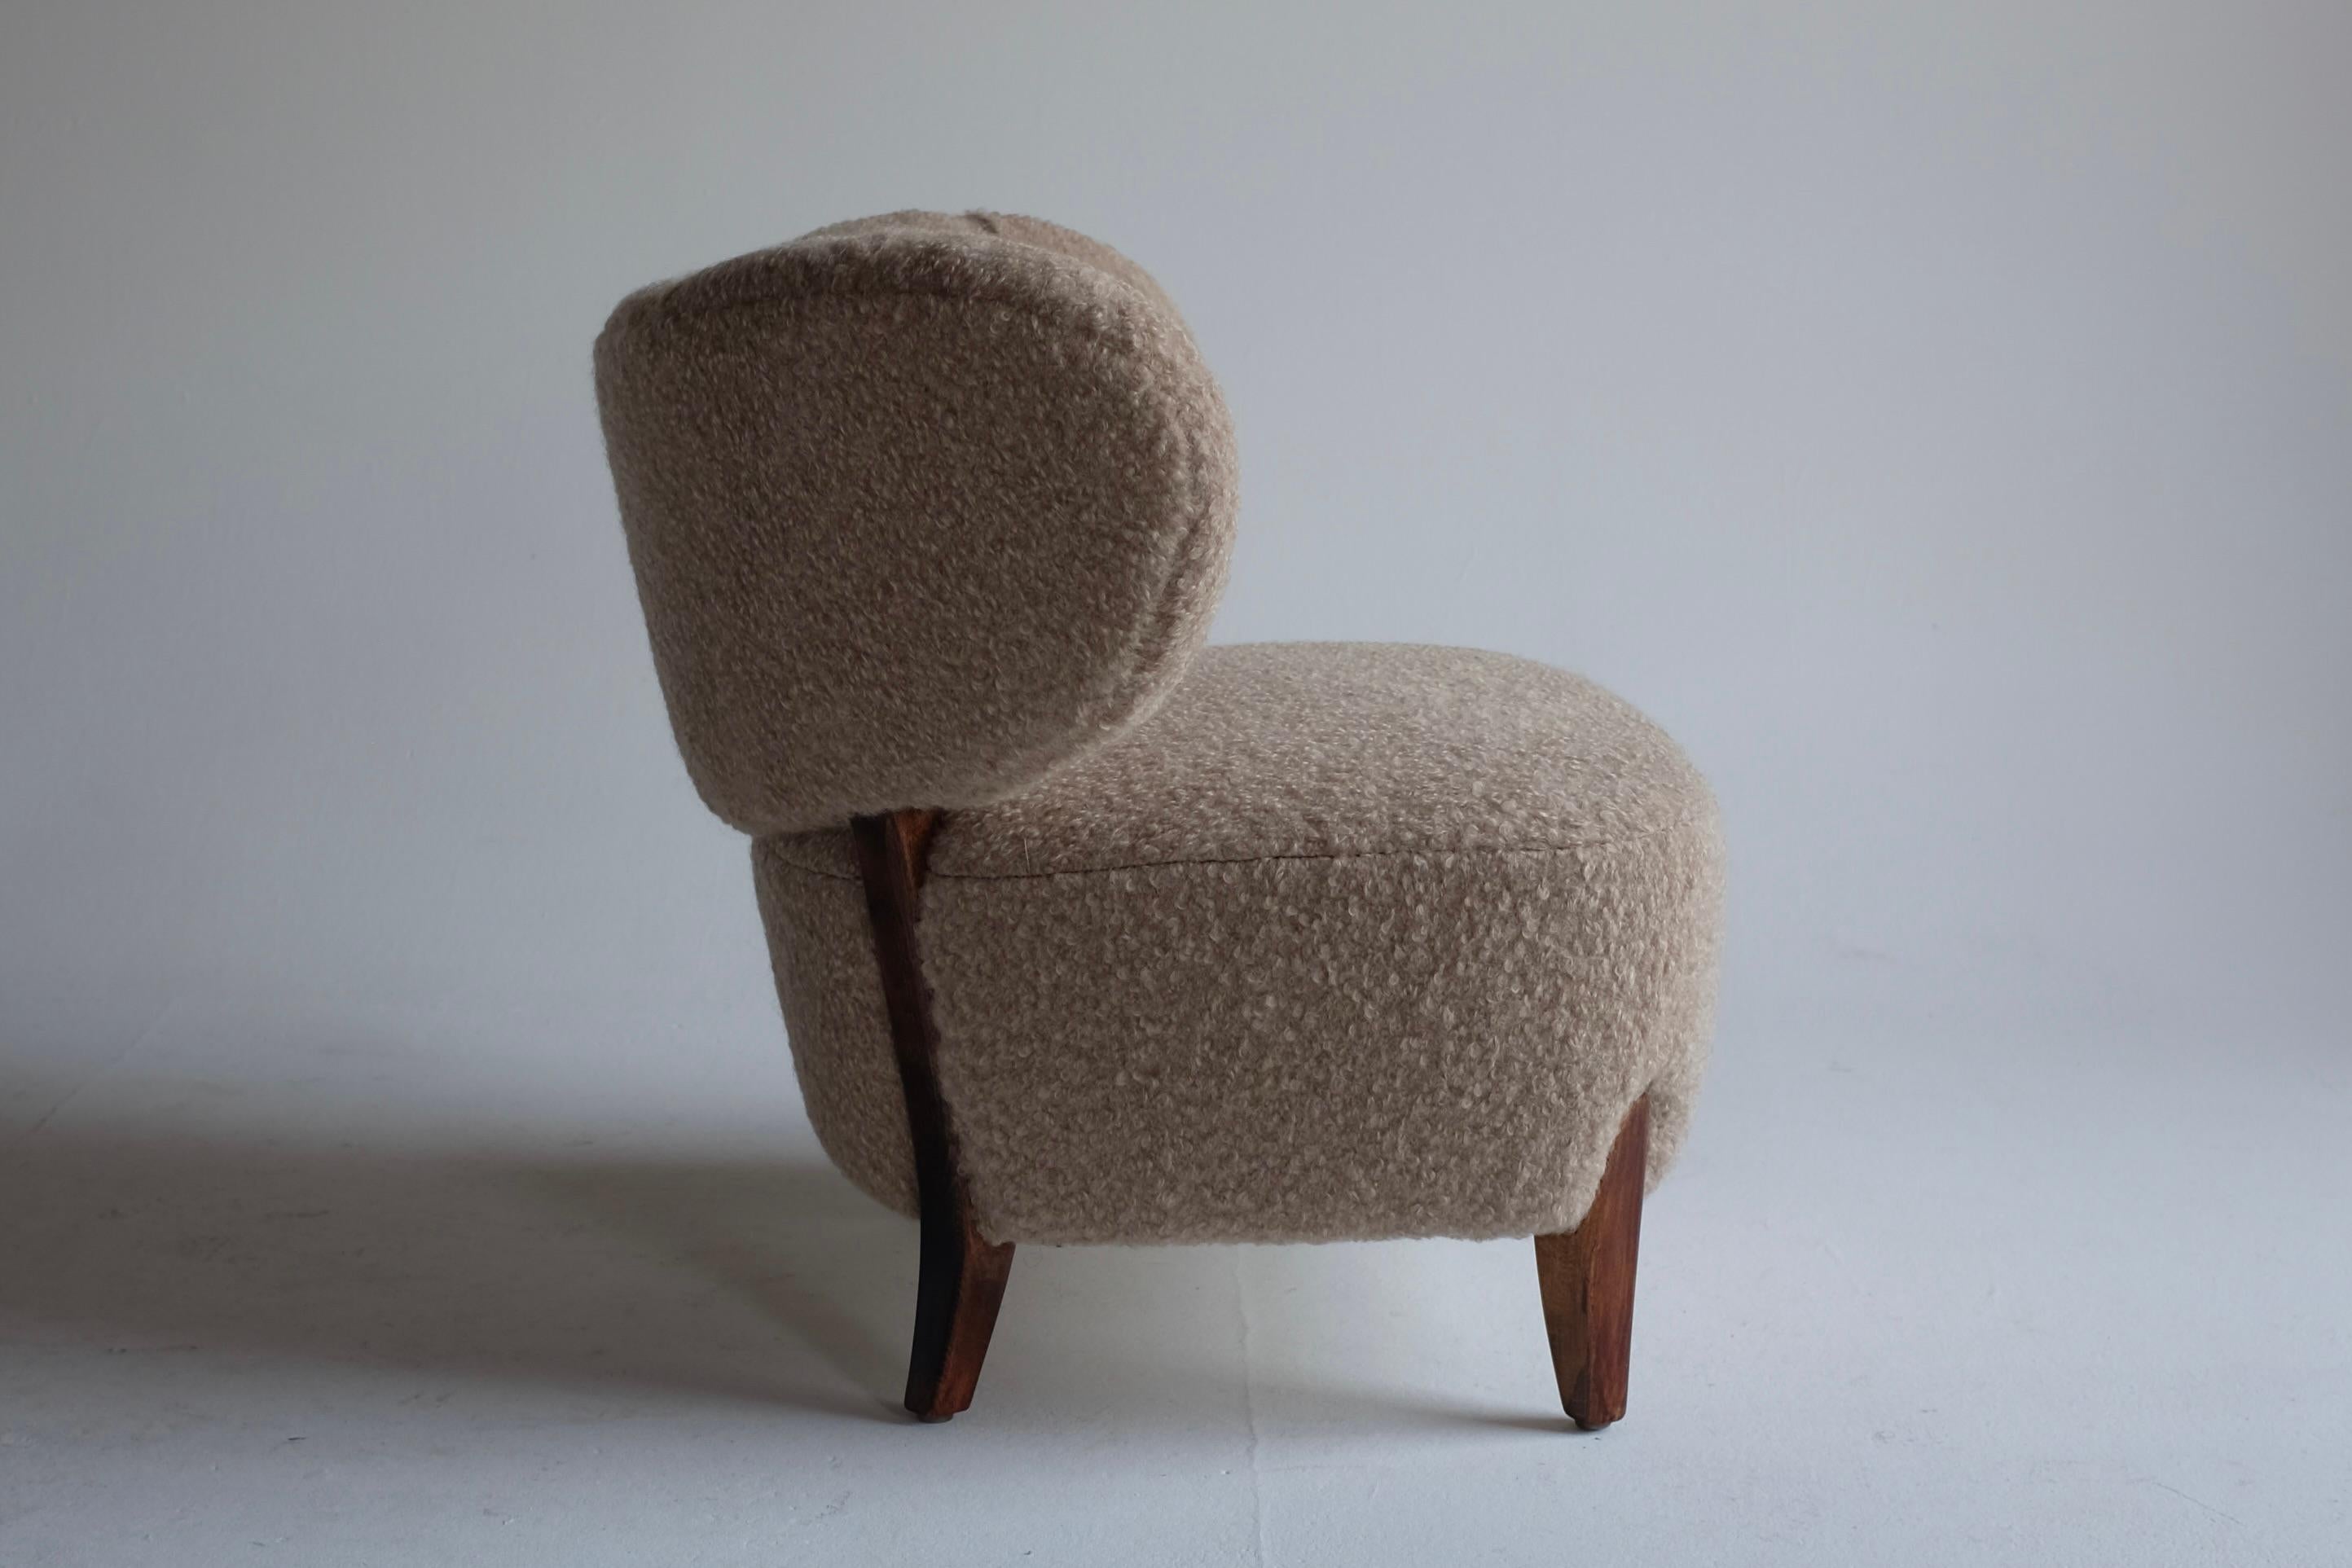 Beautiful Easy chair by Otto Schulz for Boet from the 1940s. Newly upholstered Schumacher Teddy Boucle fabric. Otto Schulz is now an iconic Swedish furniture and interior designer that was active during the 1930/40s and started his own company